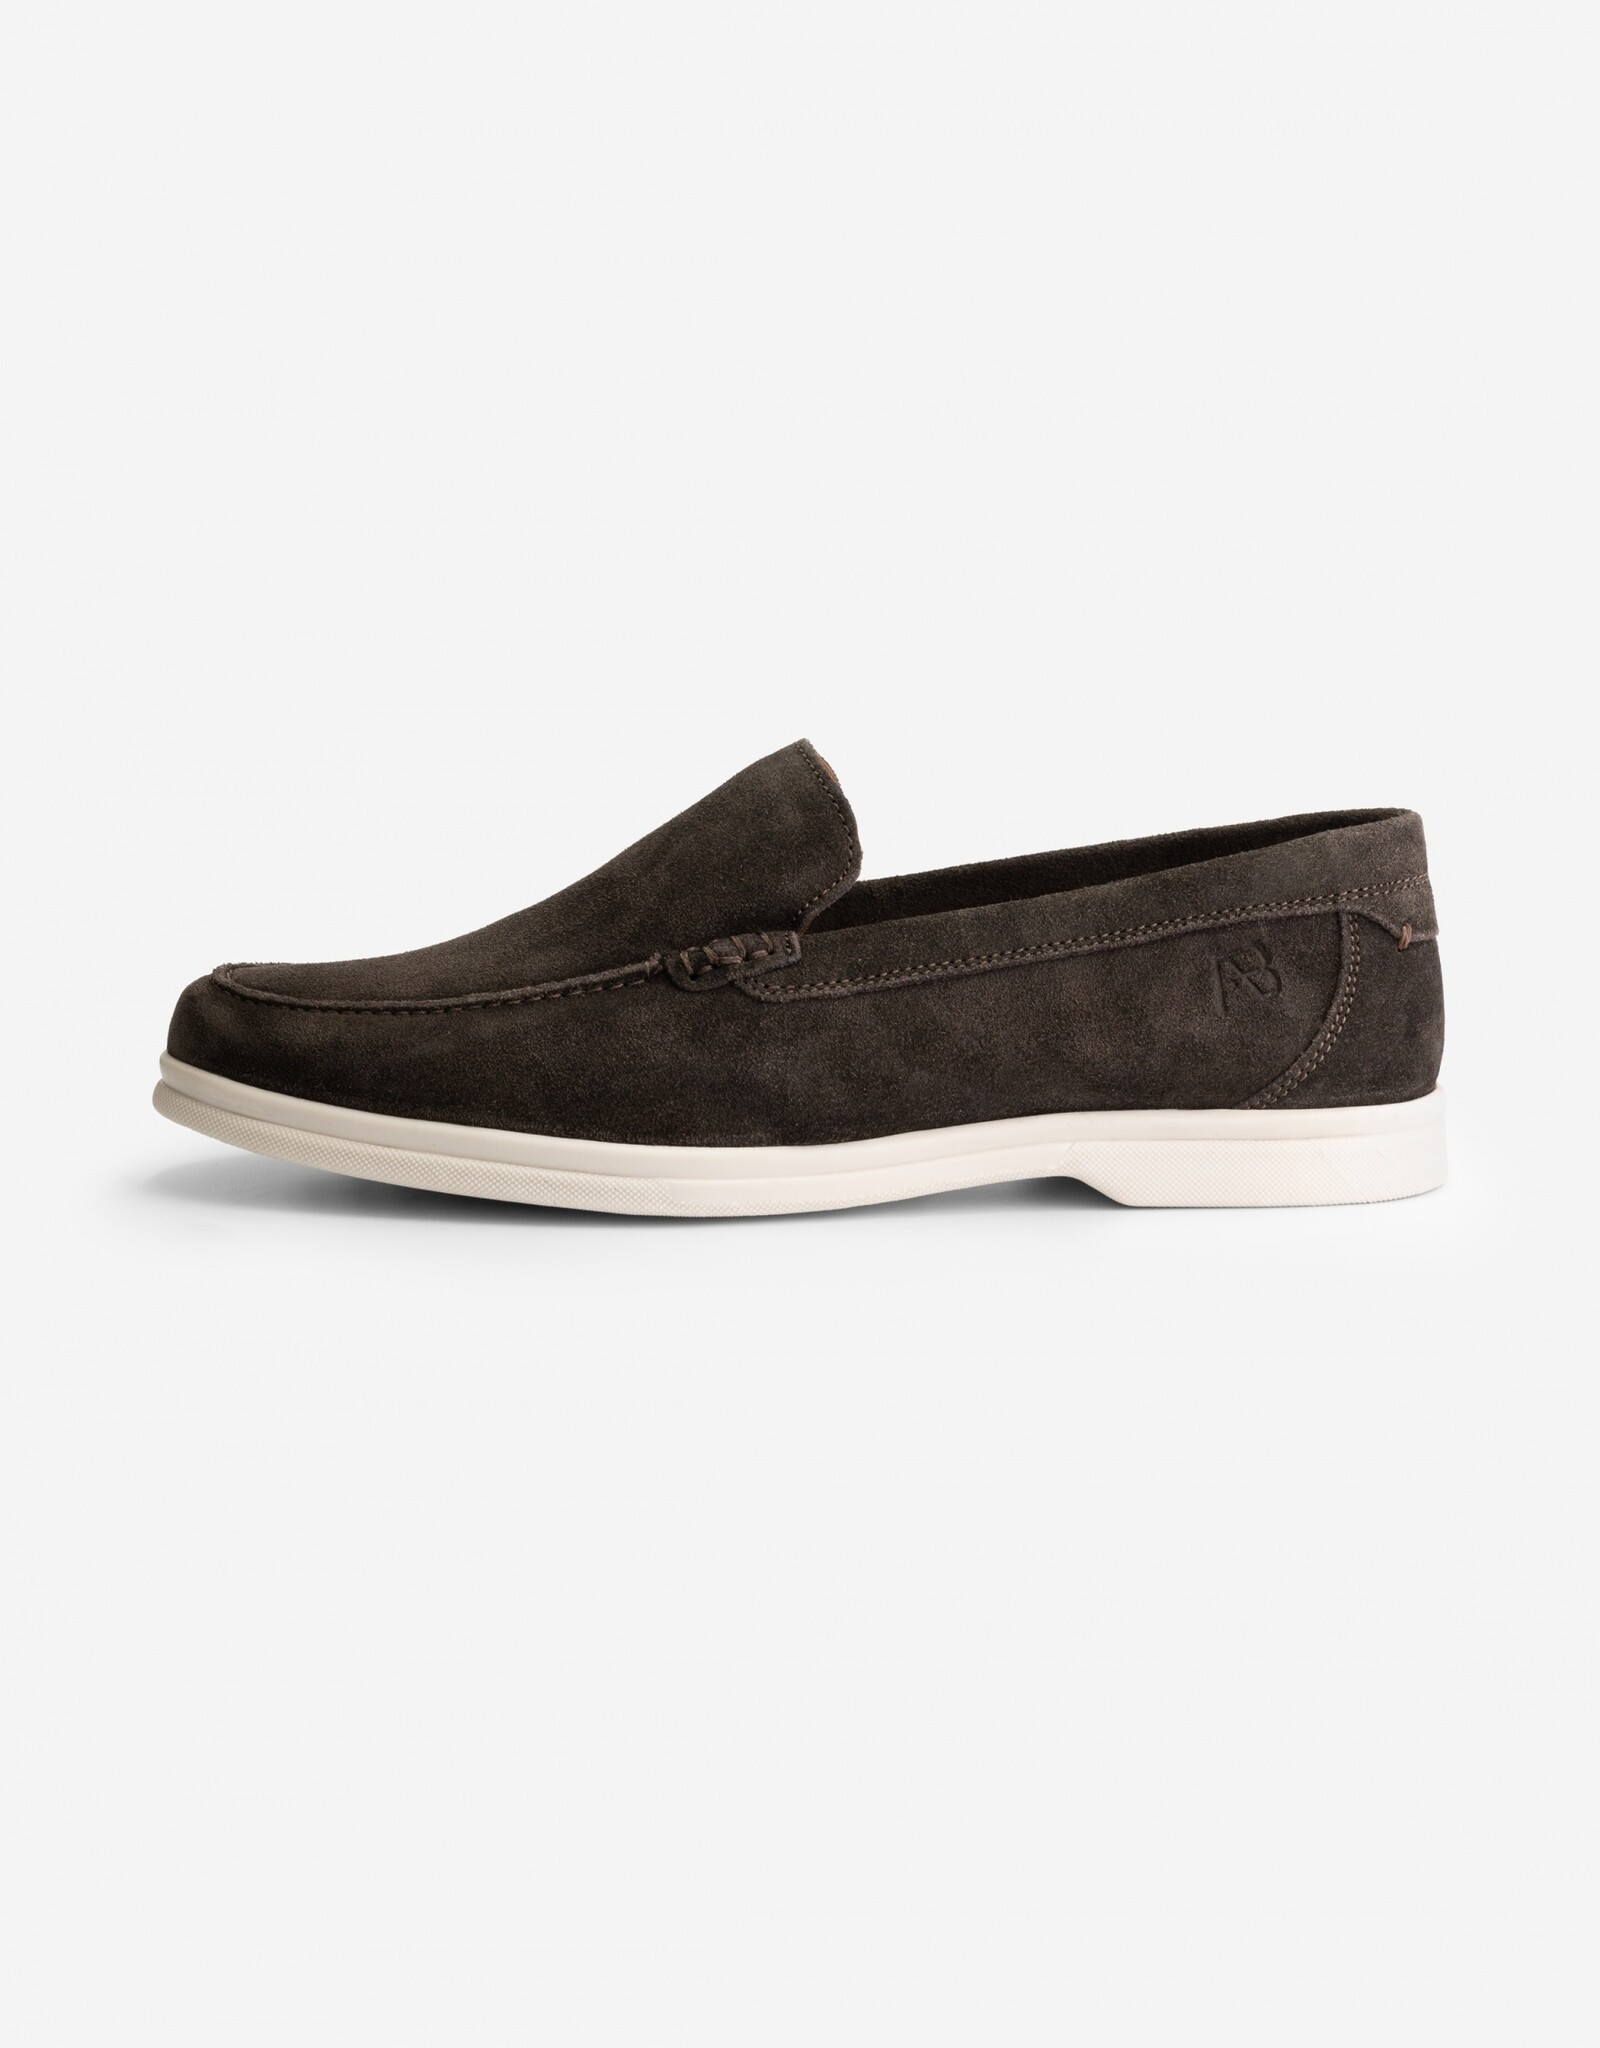 AB Lifestyle Loafer Suede